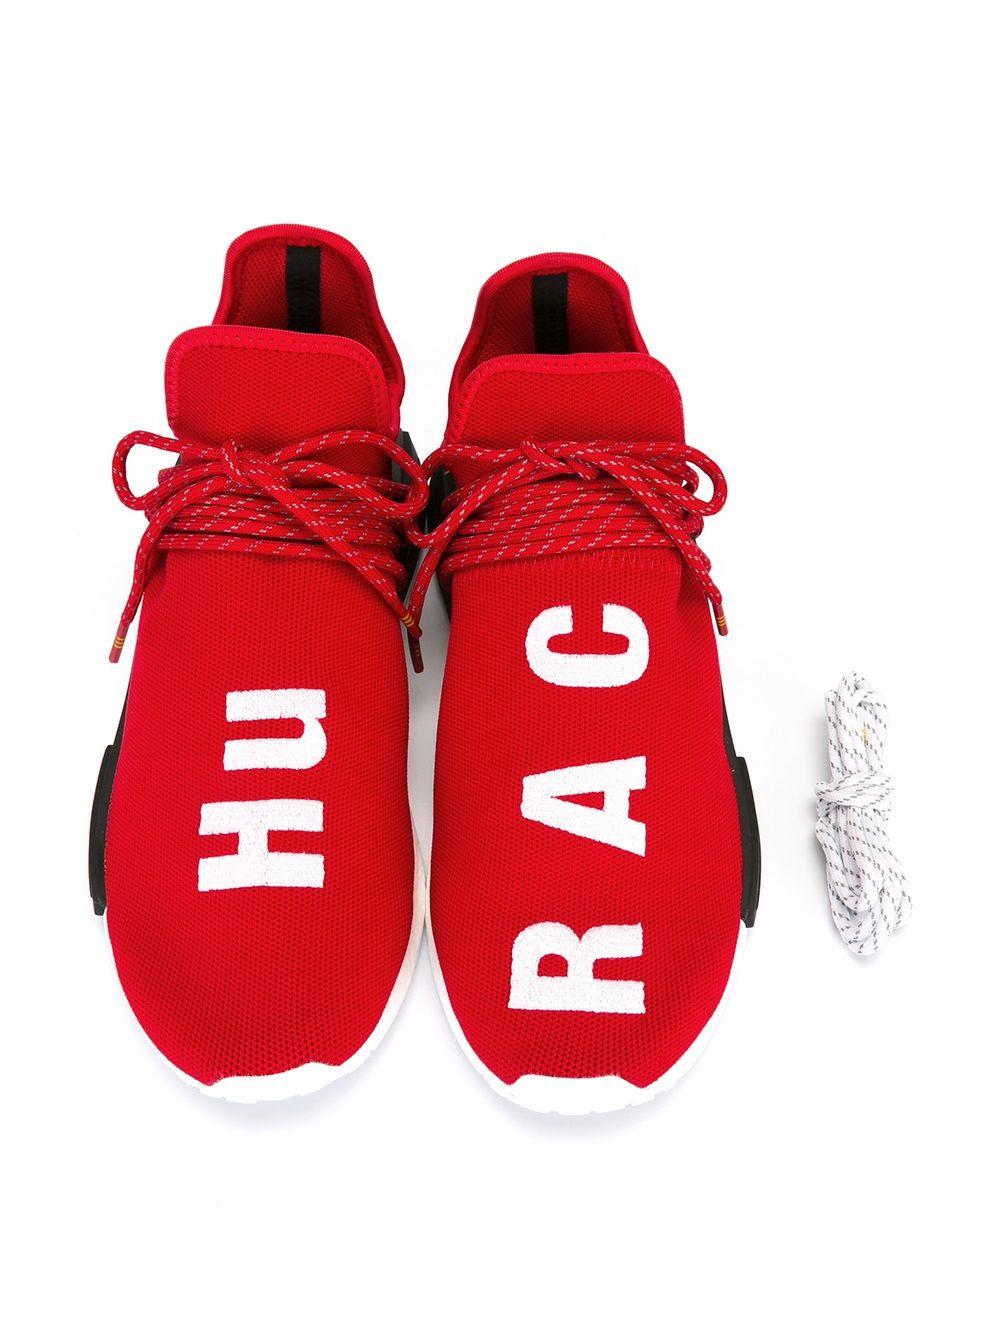 adidas Rubber Pharrell X Hu Nmd Red Human Race Sneakers for Men - Save 38%  | Lyst